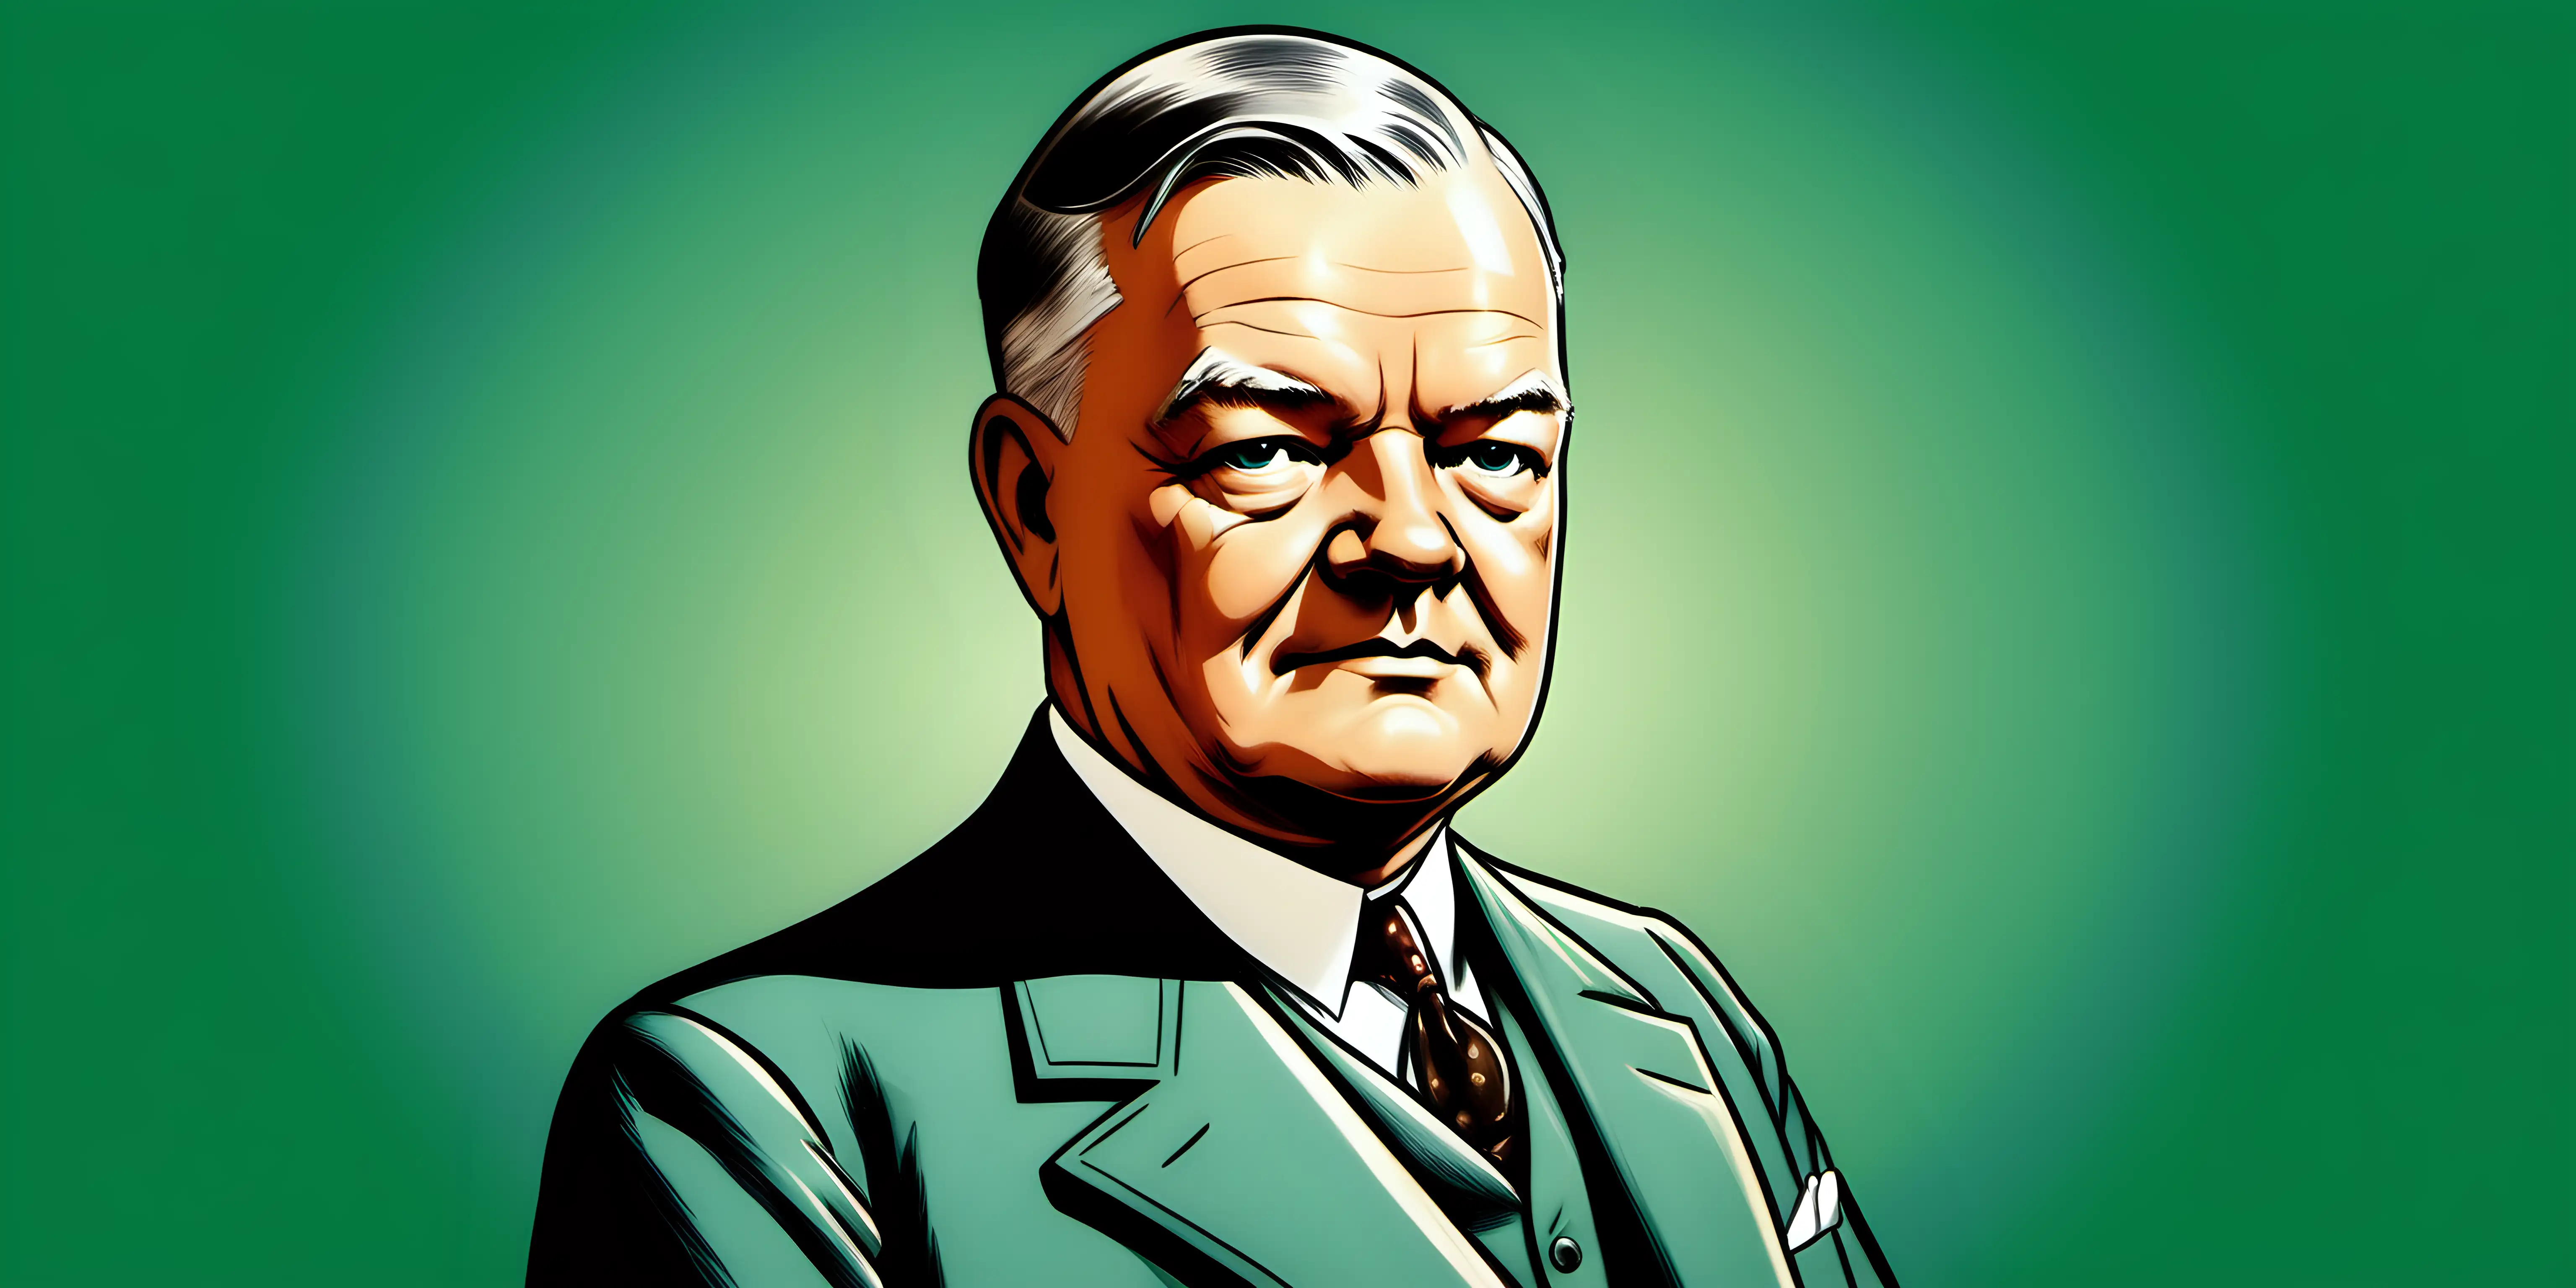 Cartoon Portrait of Herbert Hoover on a Solid Background